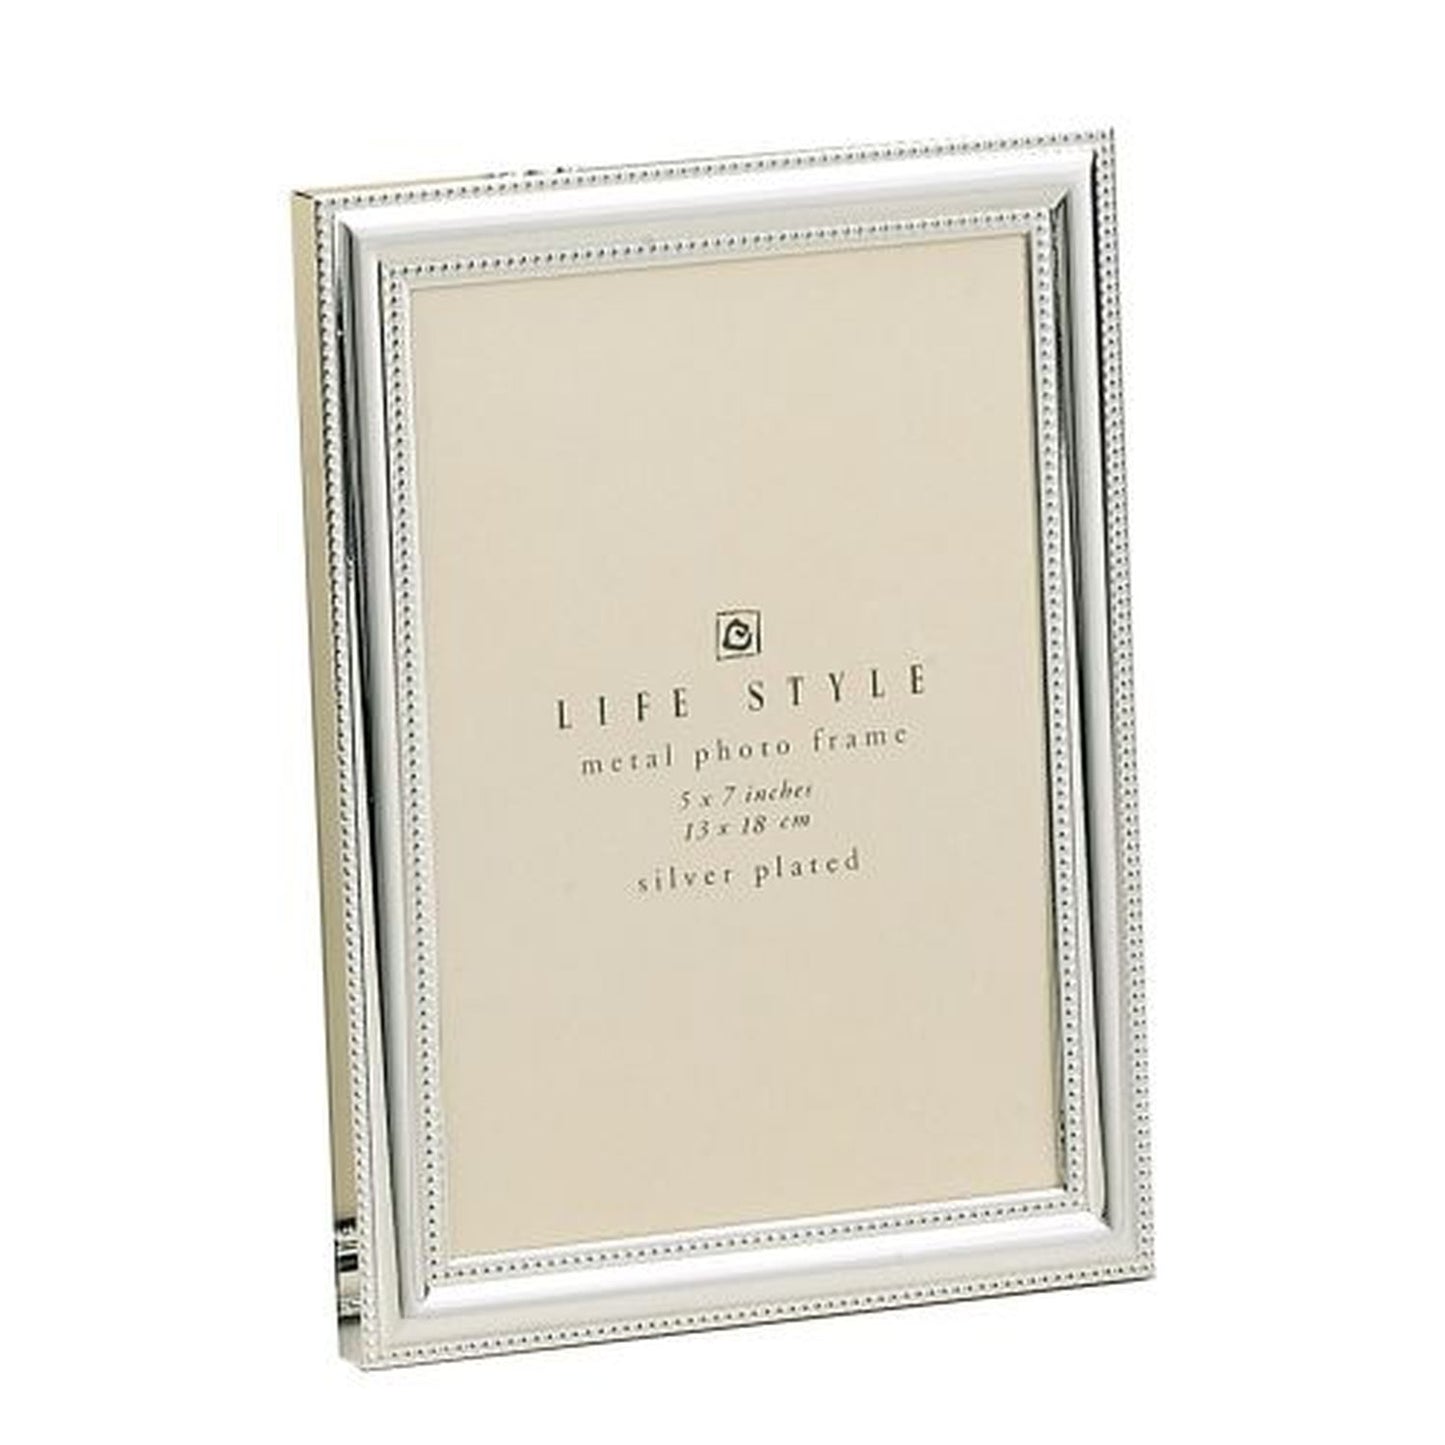 Leeber Beaded Picture Frame, 5" x 7", Silver-Plated